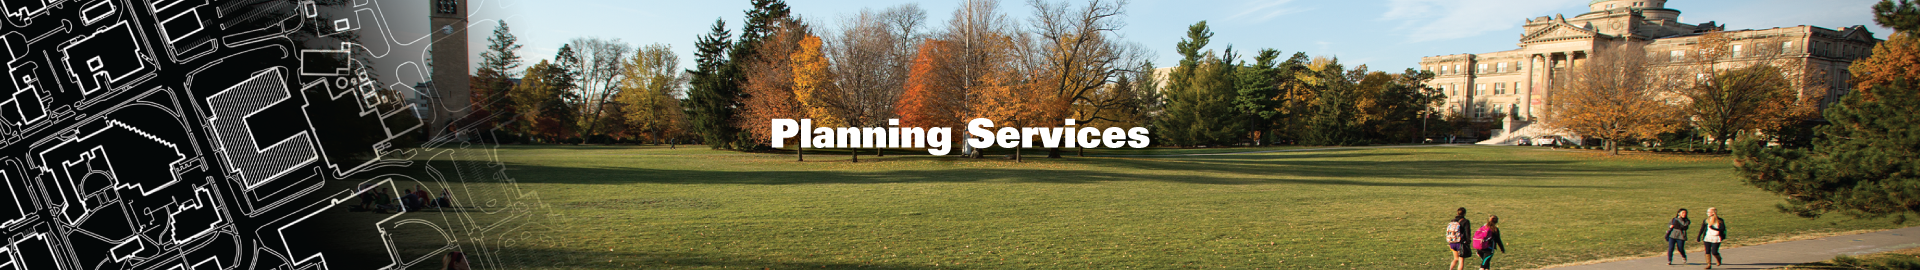 Planning Services